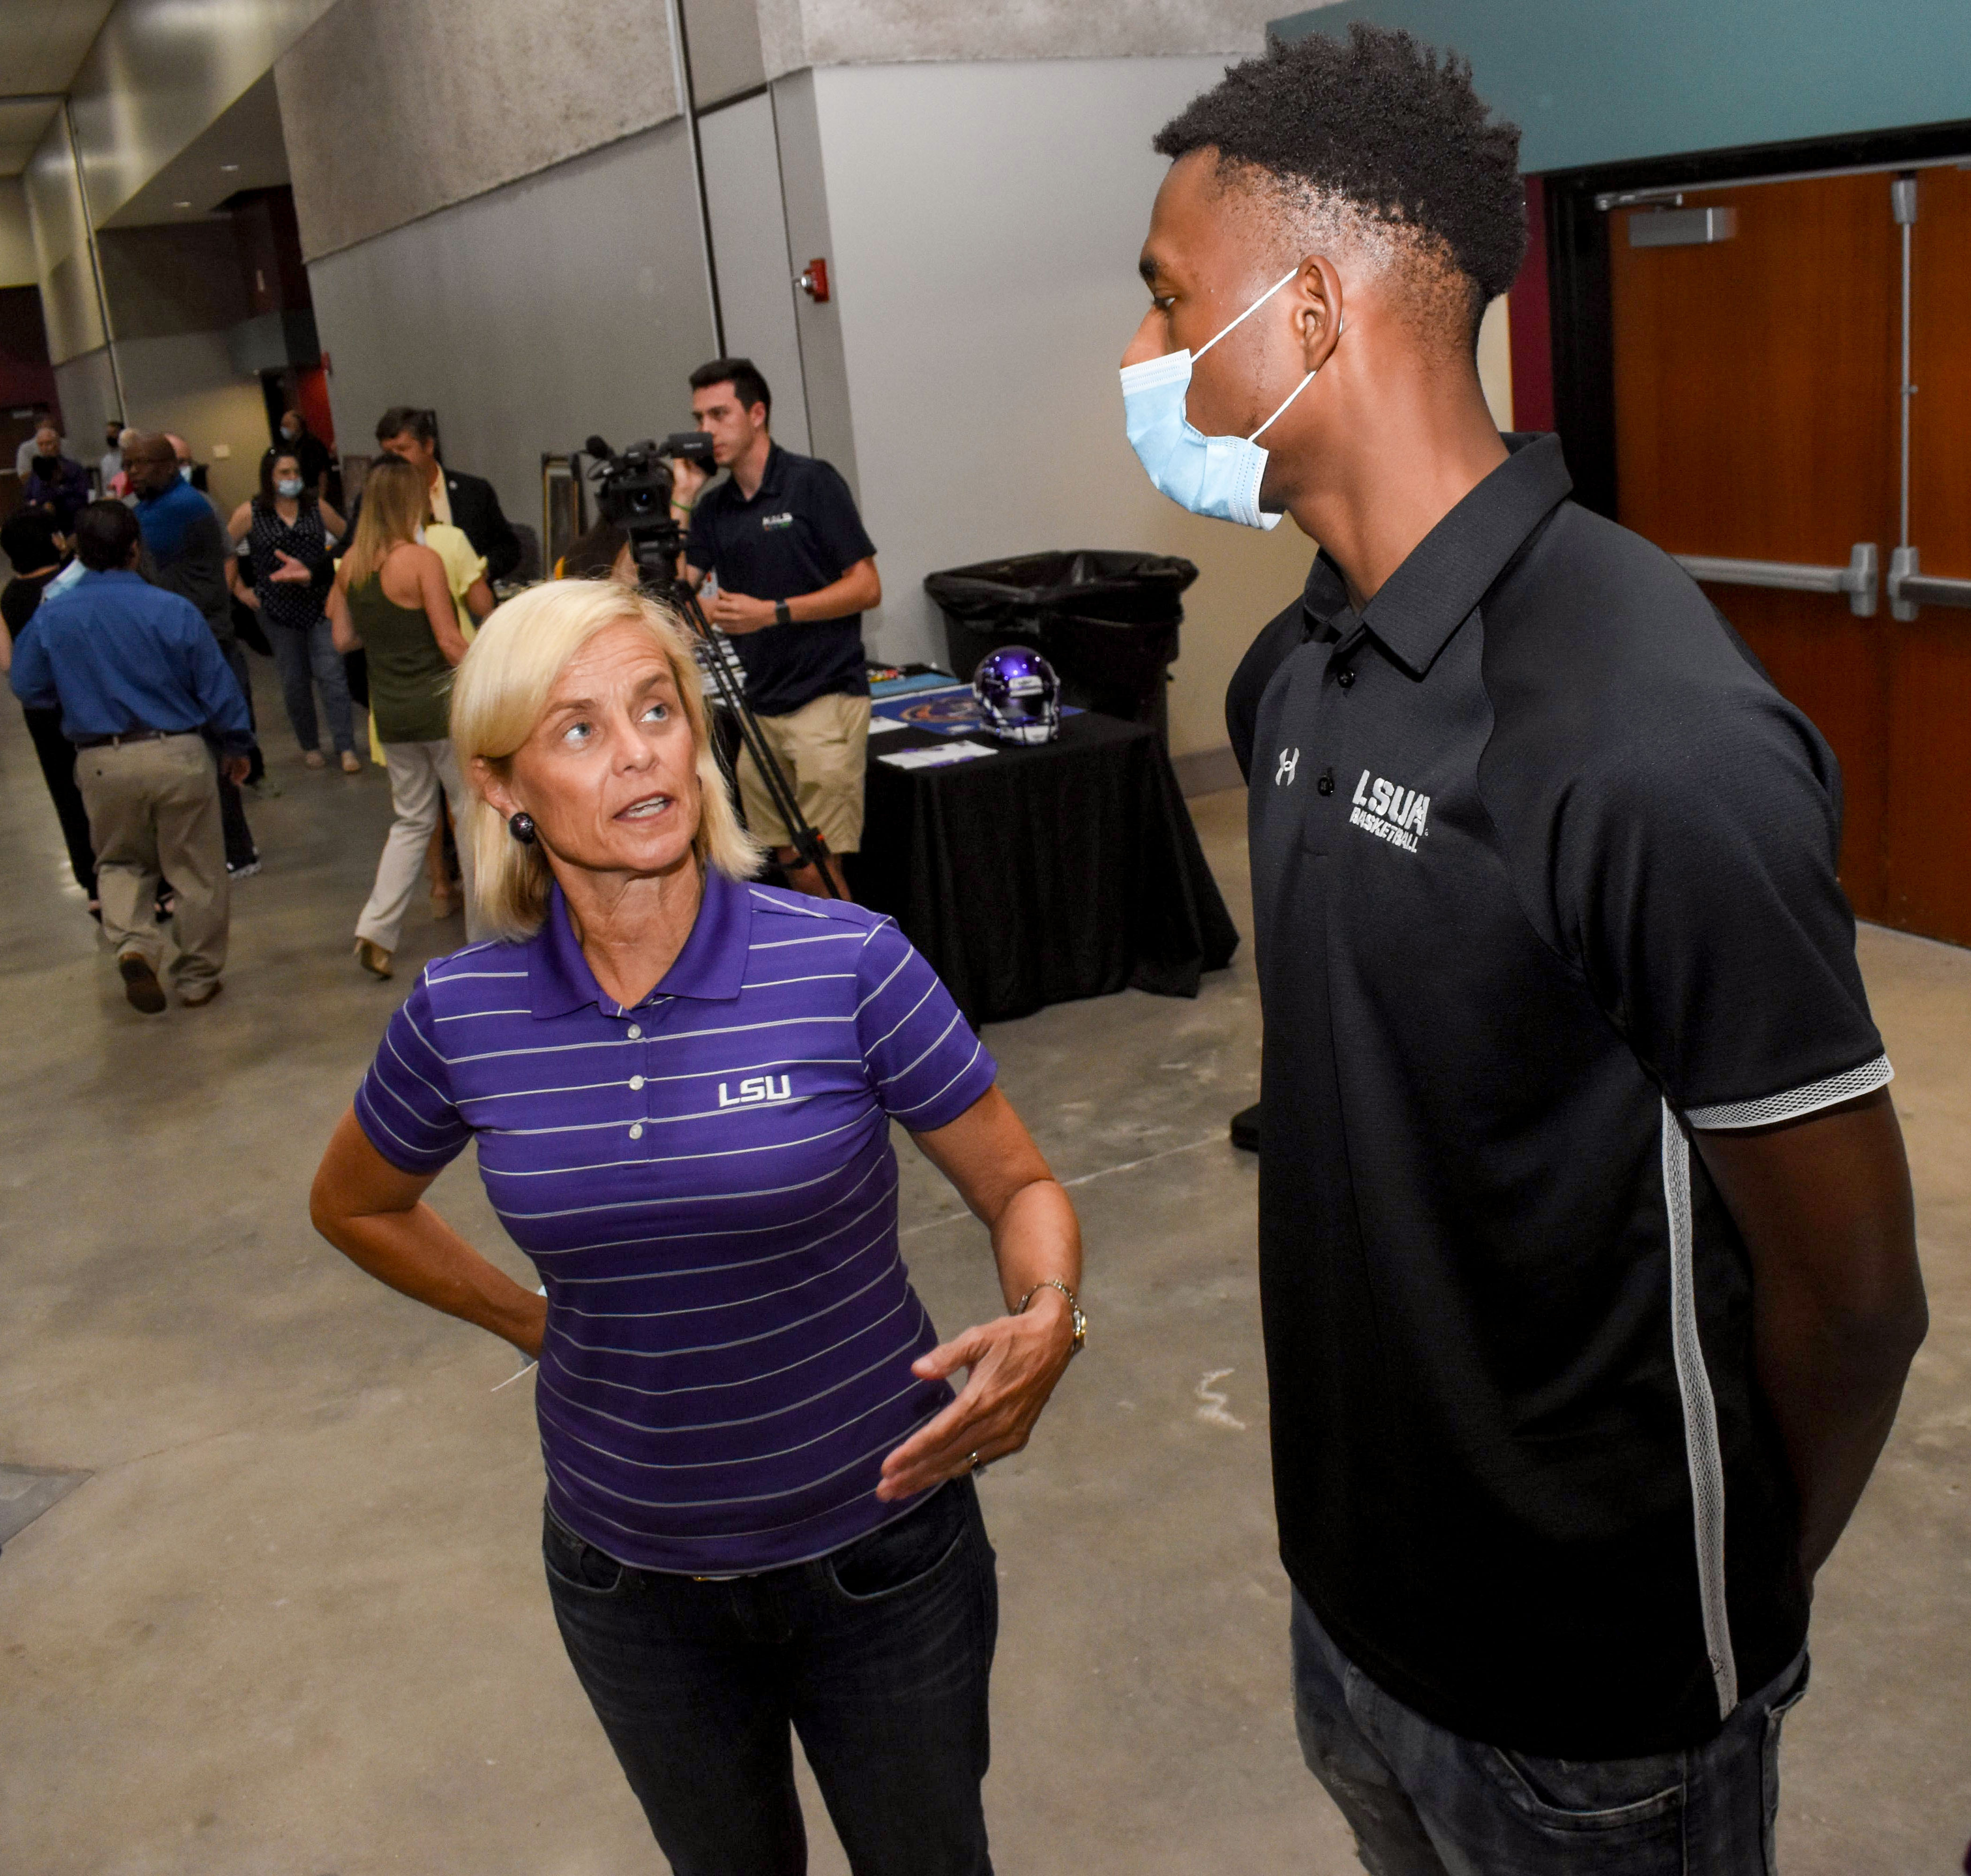 Mulkey's arrival in Baton Rouge has been well-received within the athletic department. Said Woodward at the time of her hiring: "We look forward to working with her as she instills that championship culture at LSU."